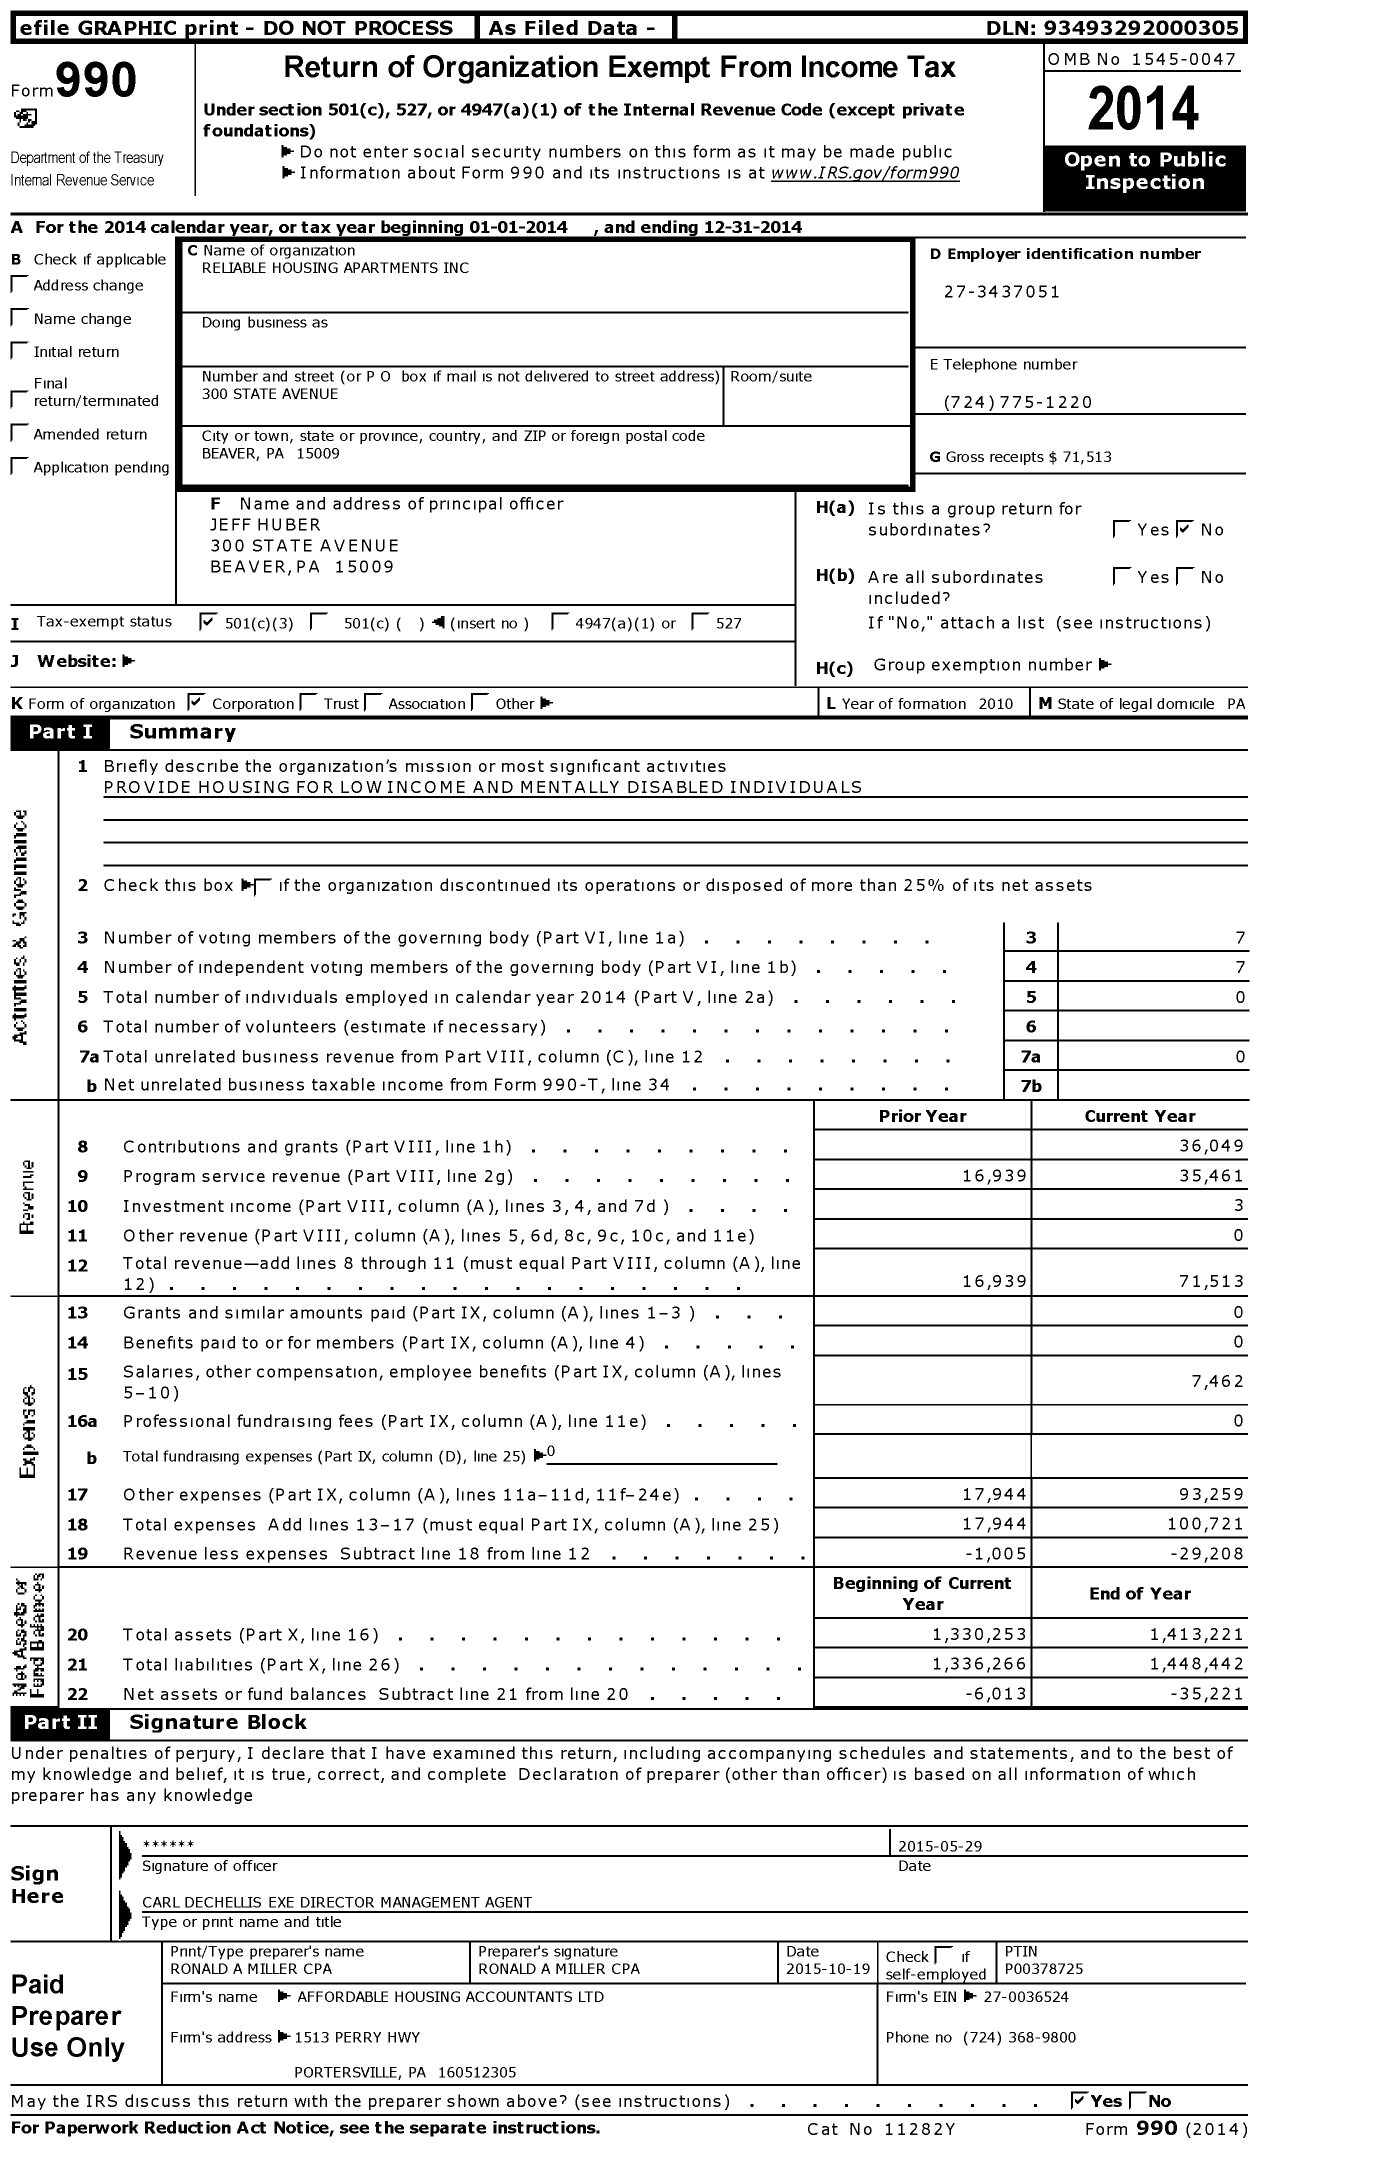 Image of first page of 2014 Form 990 for Reliable Housing Apartments